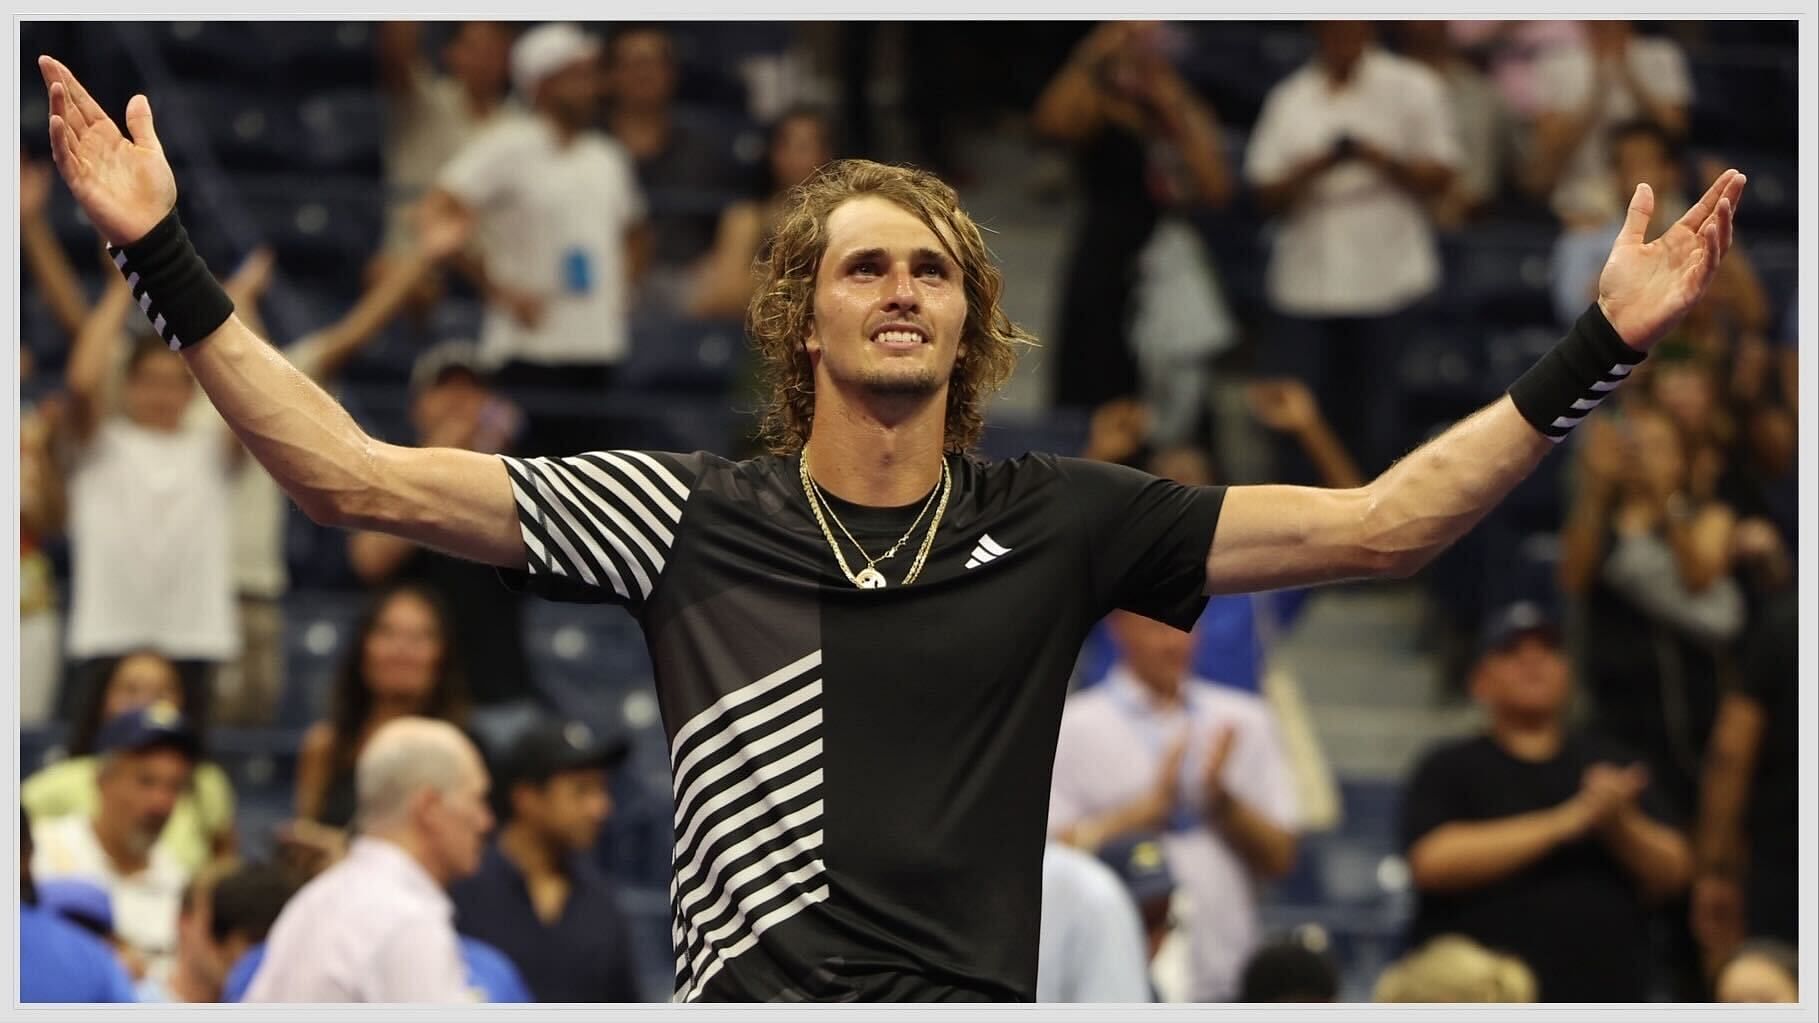 Alexander Zverev is yet to win a Grand Slam title